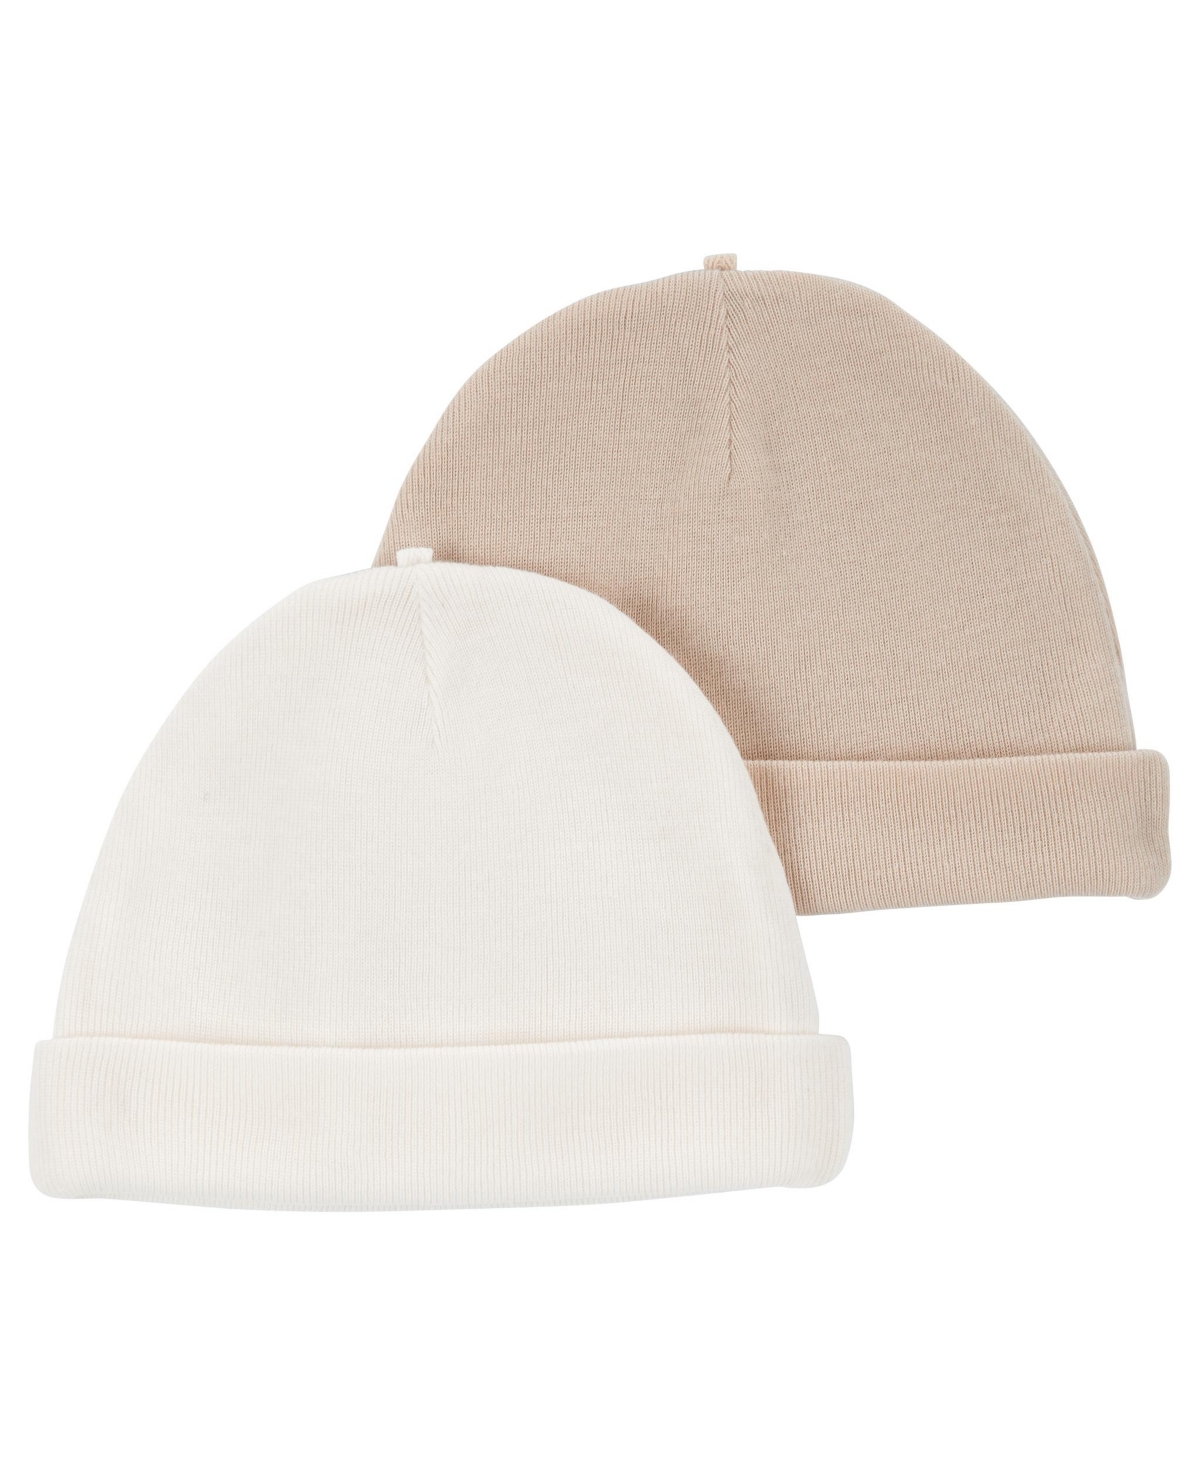 Carter's Baby Boys Or Baby Girls Rolled Cuff Hats, Pack Of 2 In Neutral